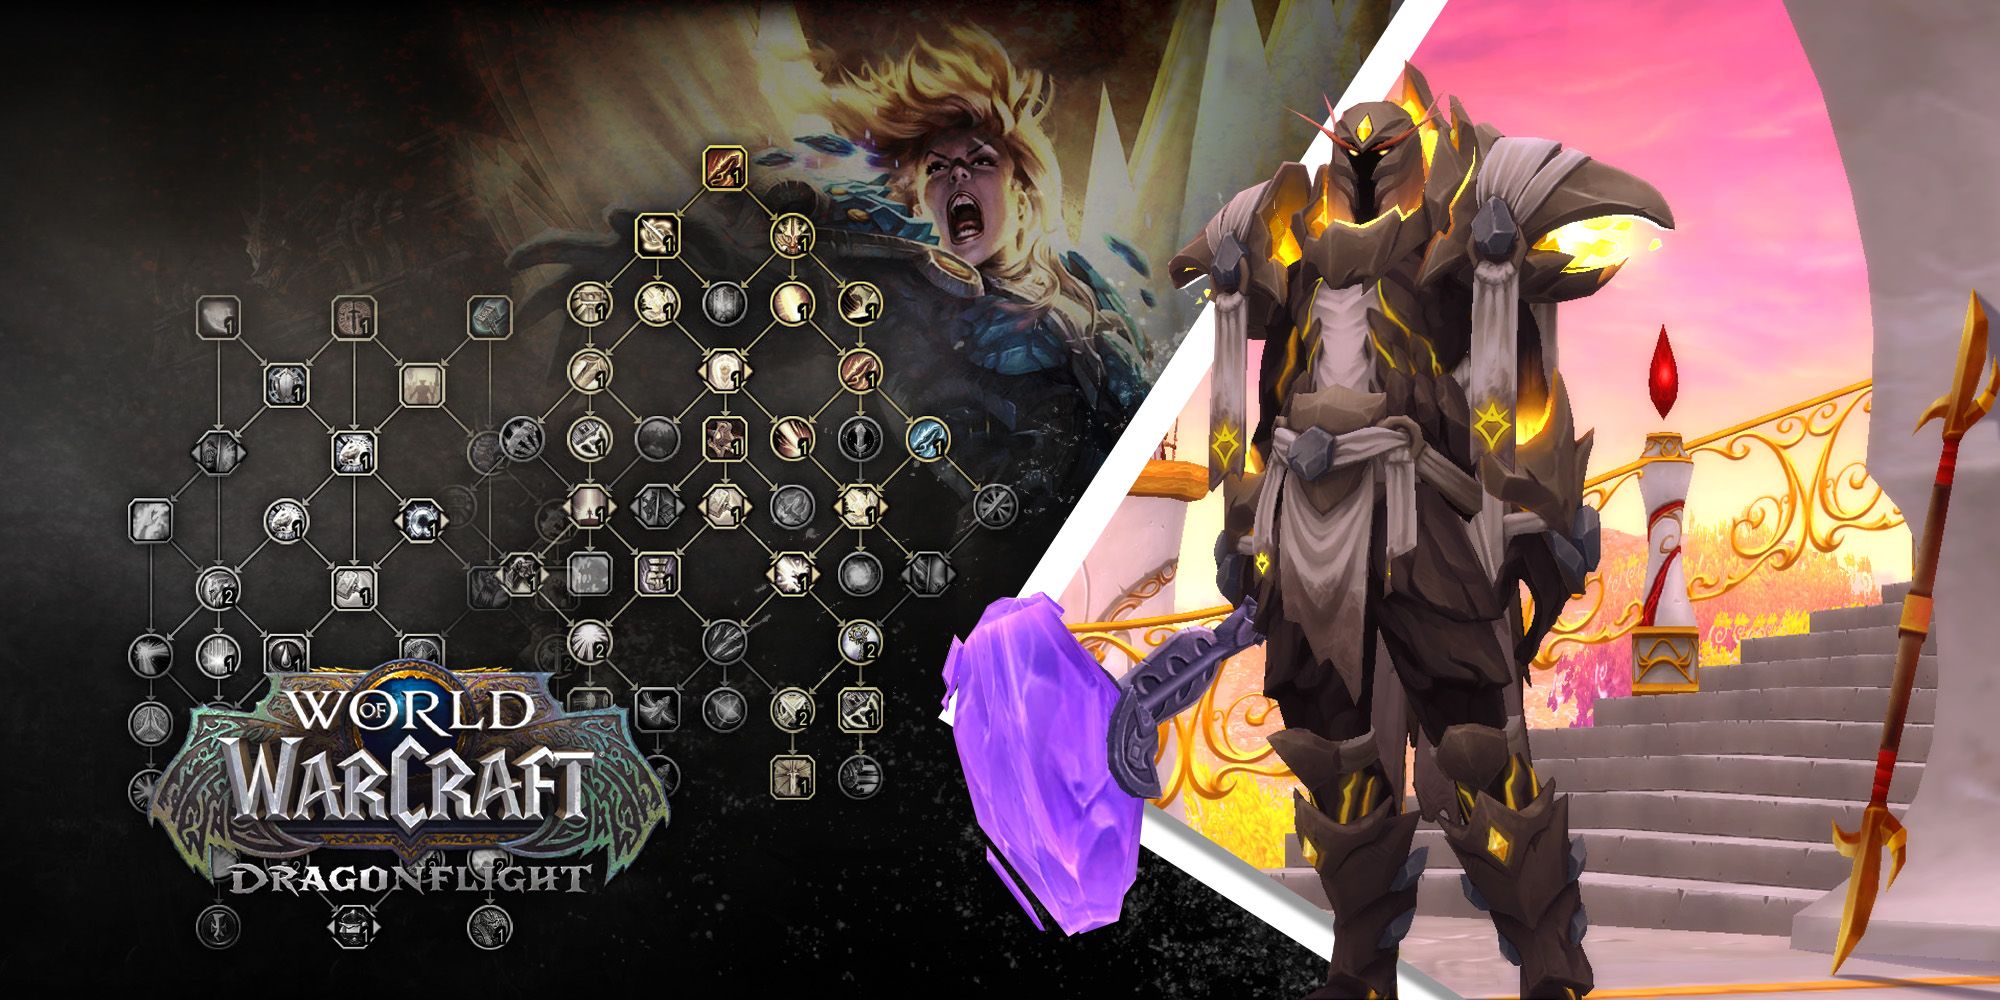 Death Knight Dragonflight Talent Tree Preview for All Specs - Wowhead News